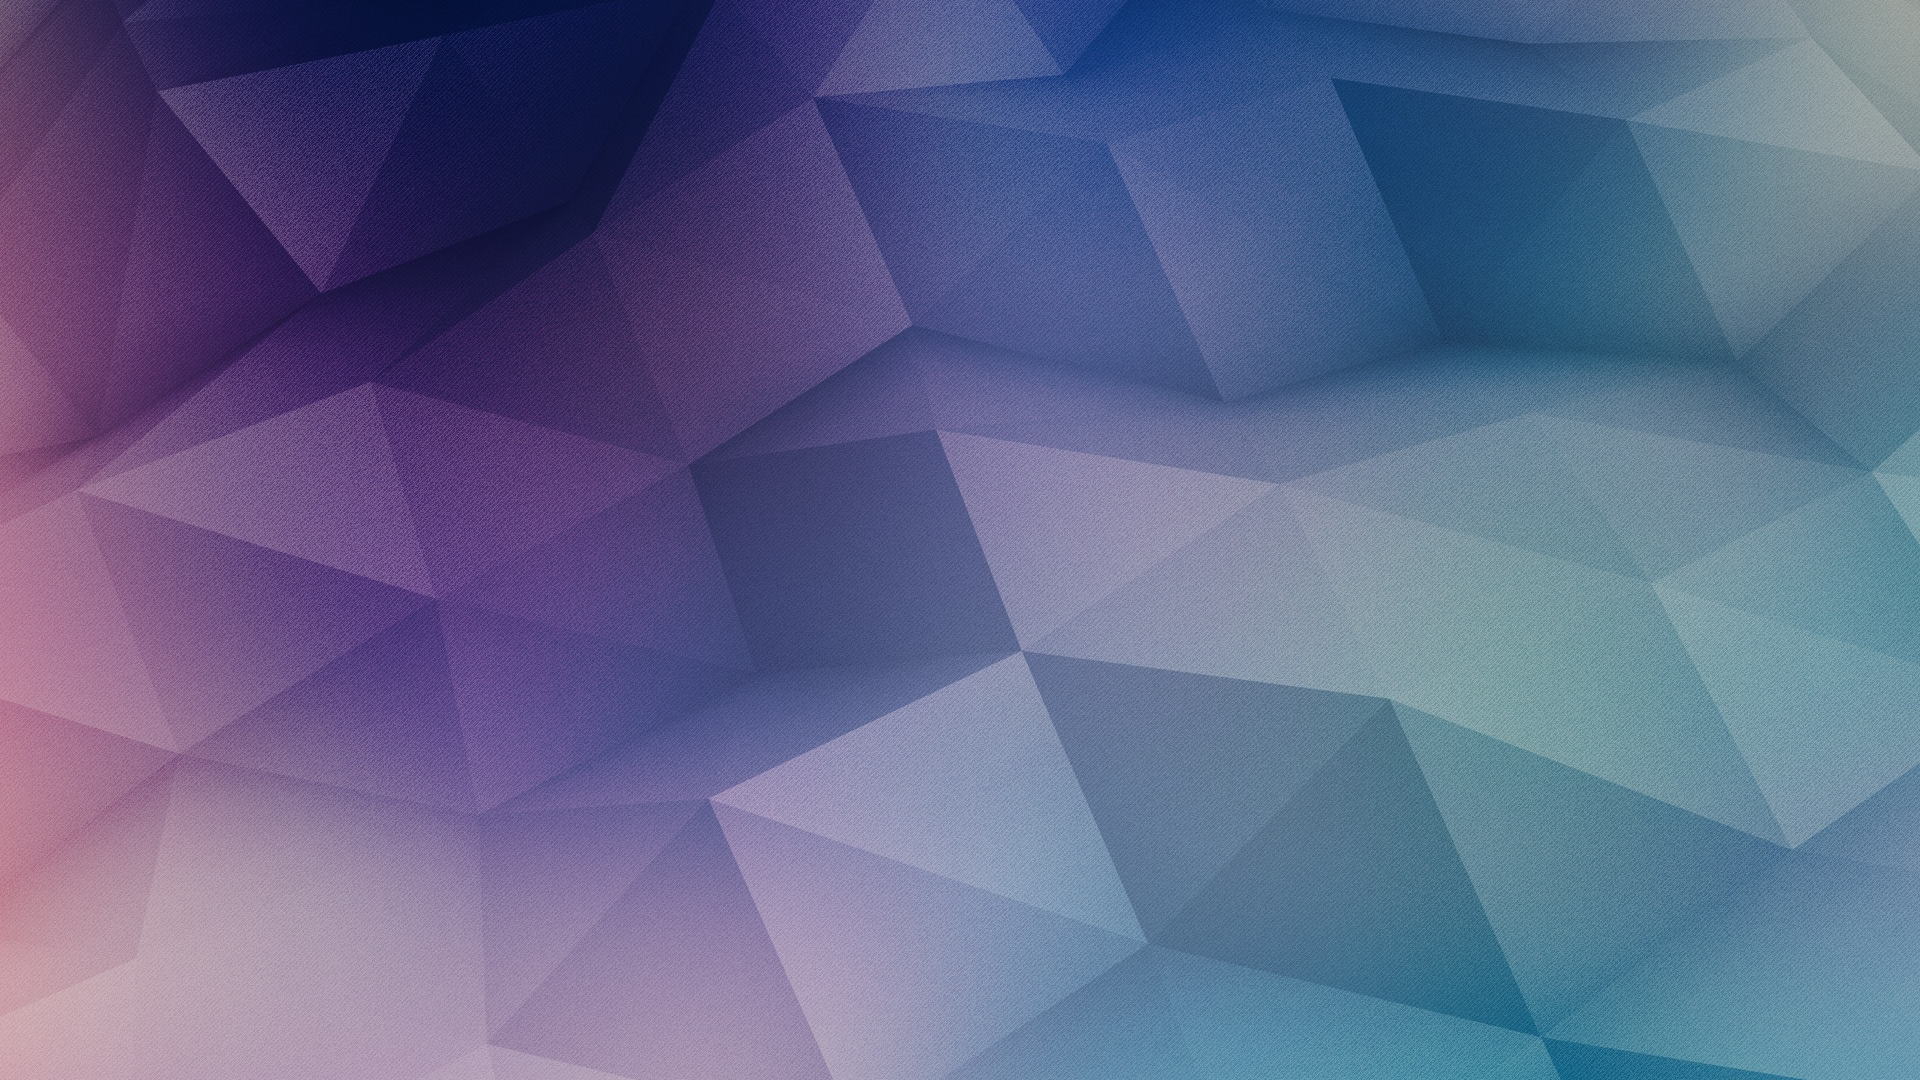 General 1920x1080 low poly abstract violet blue purple texture digital art